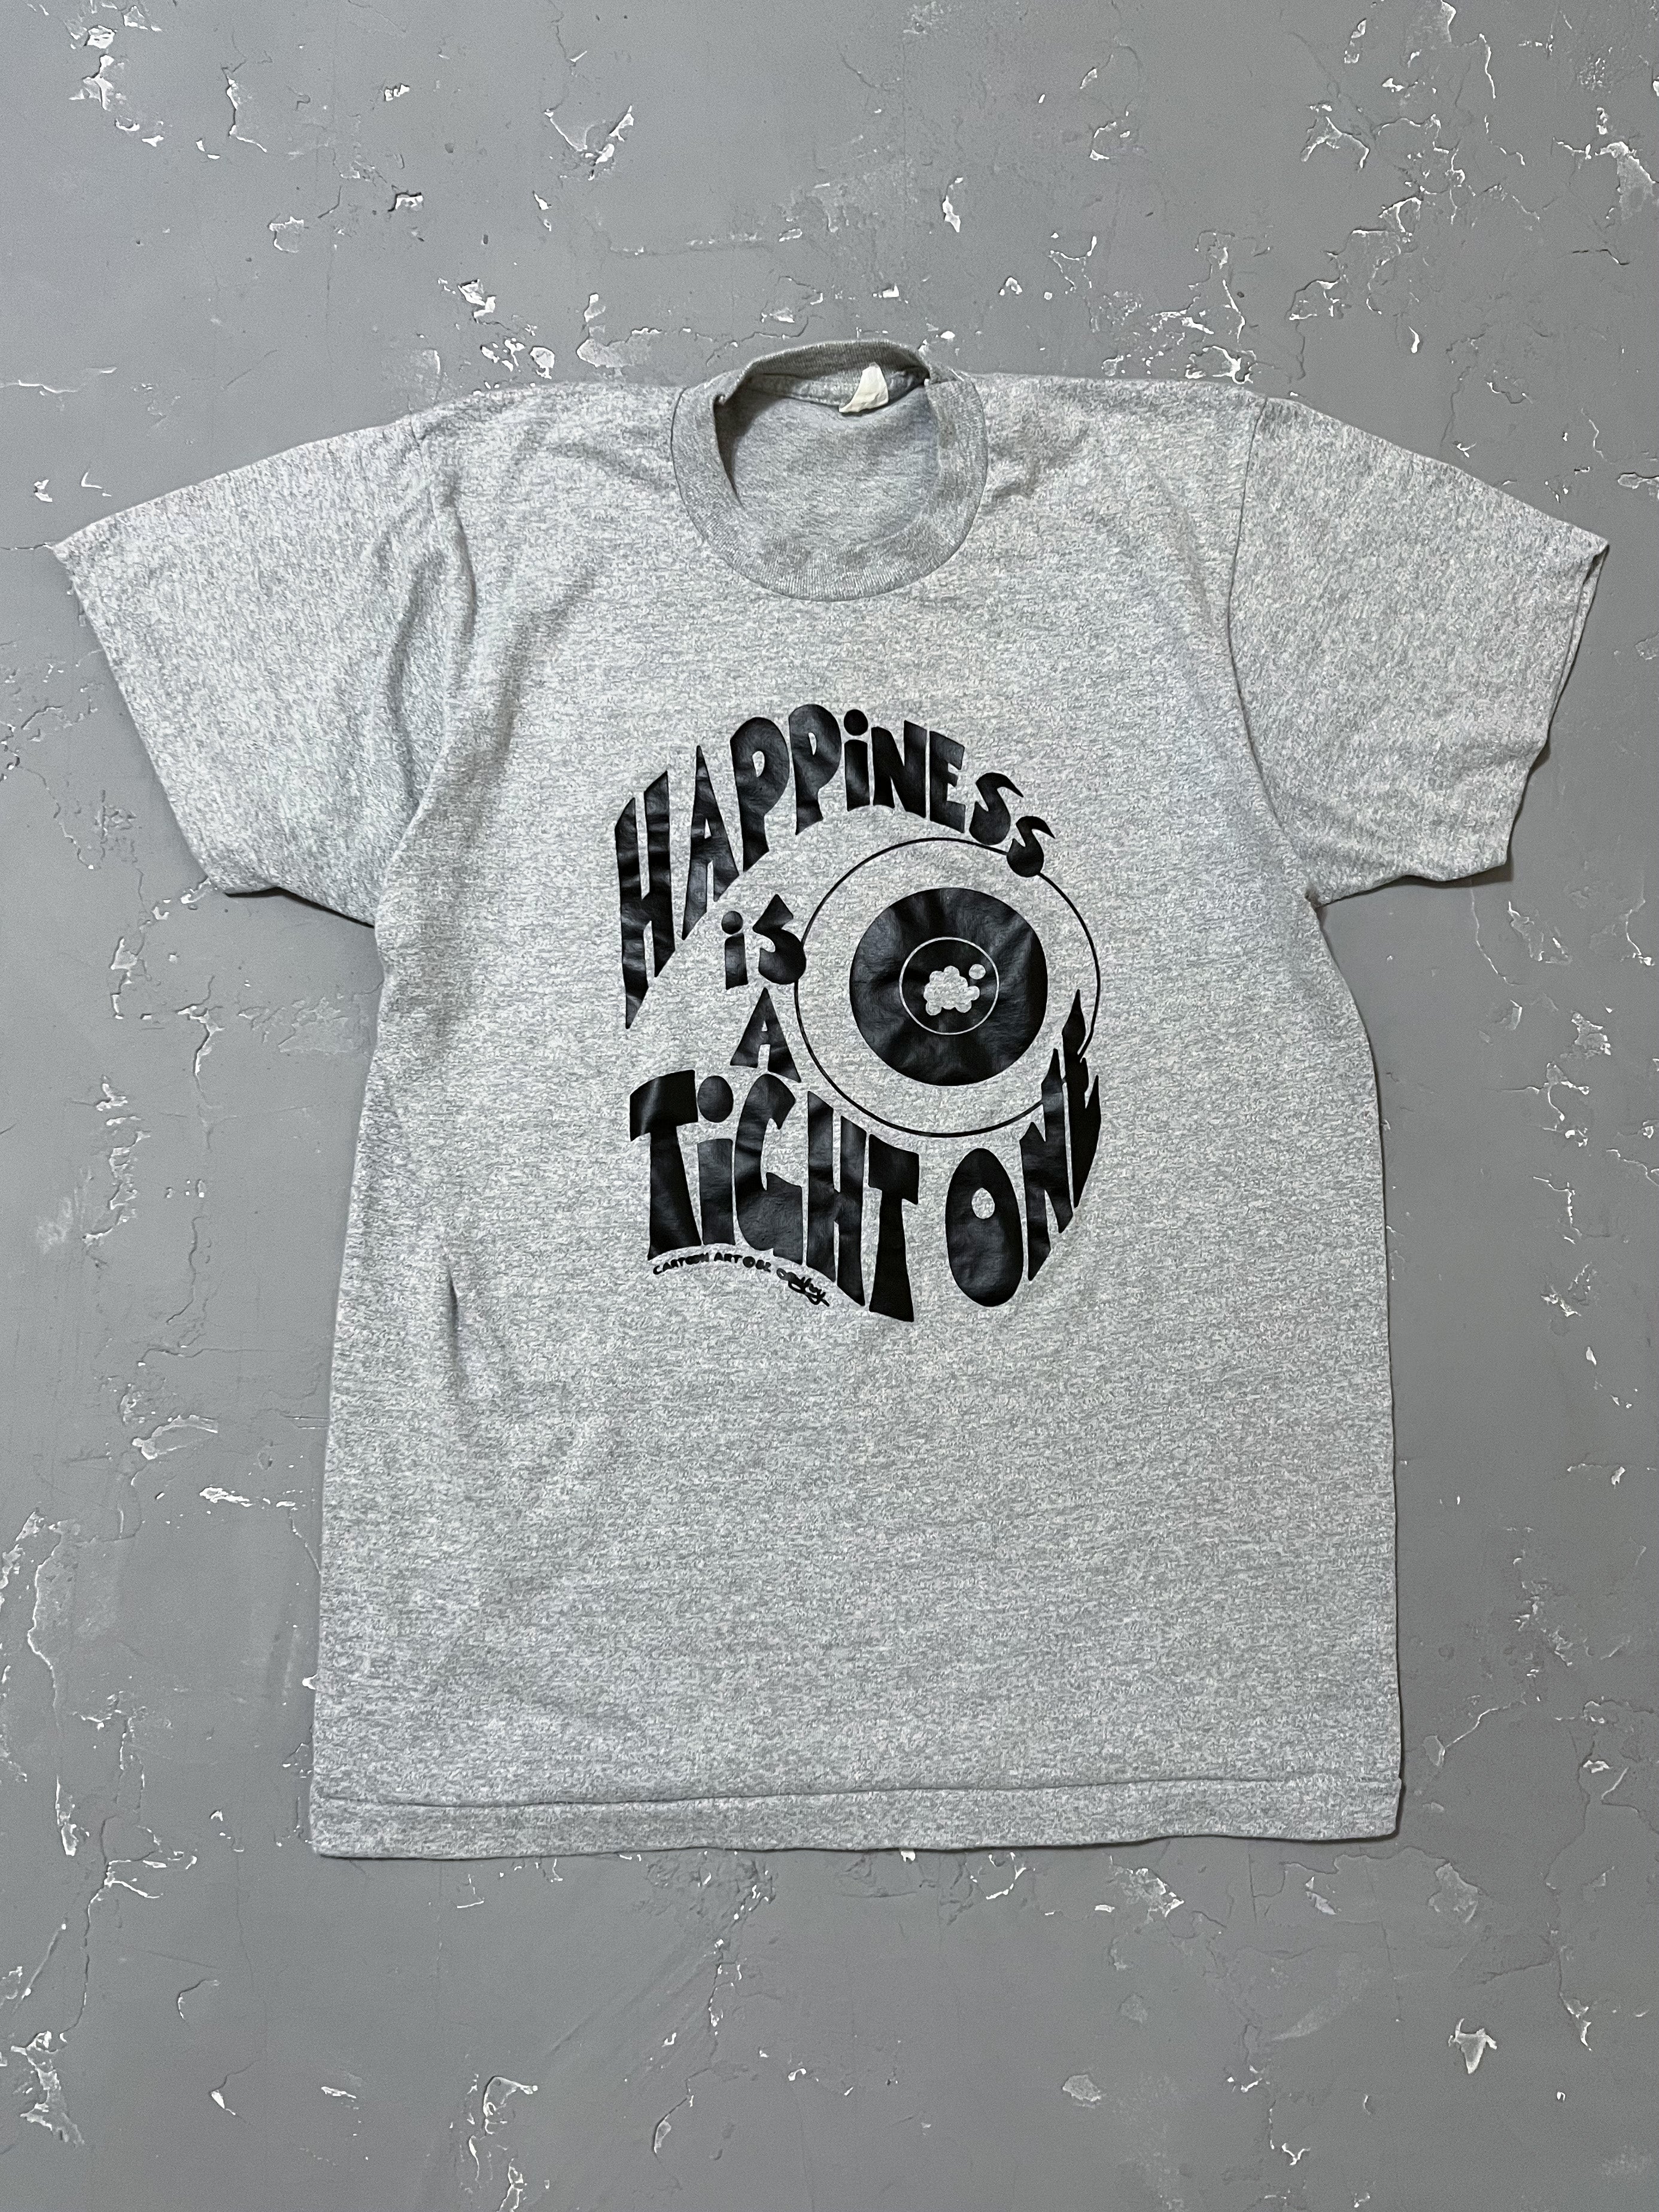 1980s “Happiness is a Tight One” Tee [S]